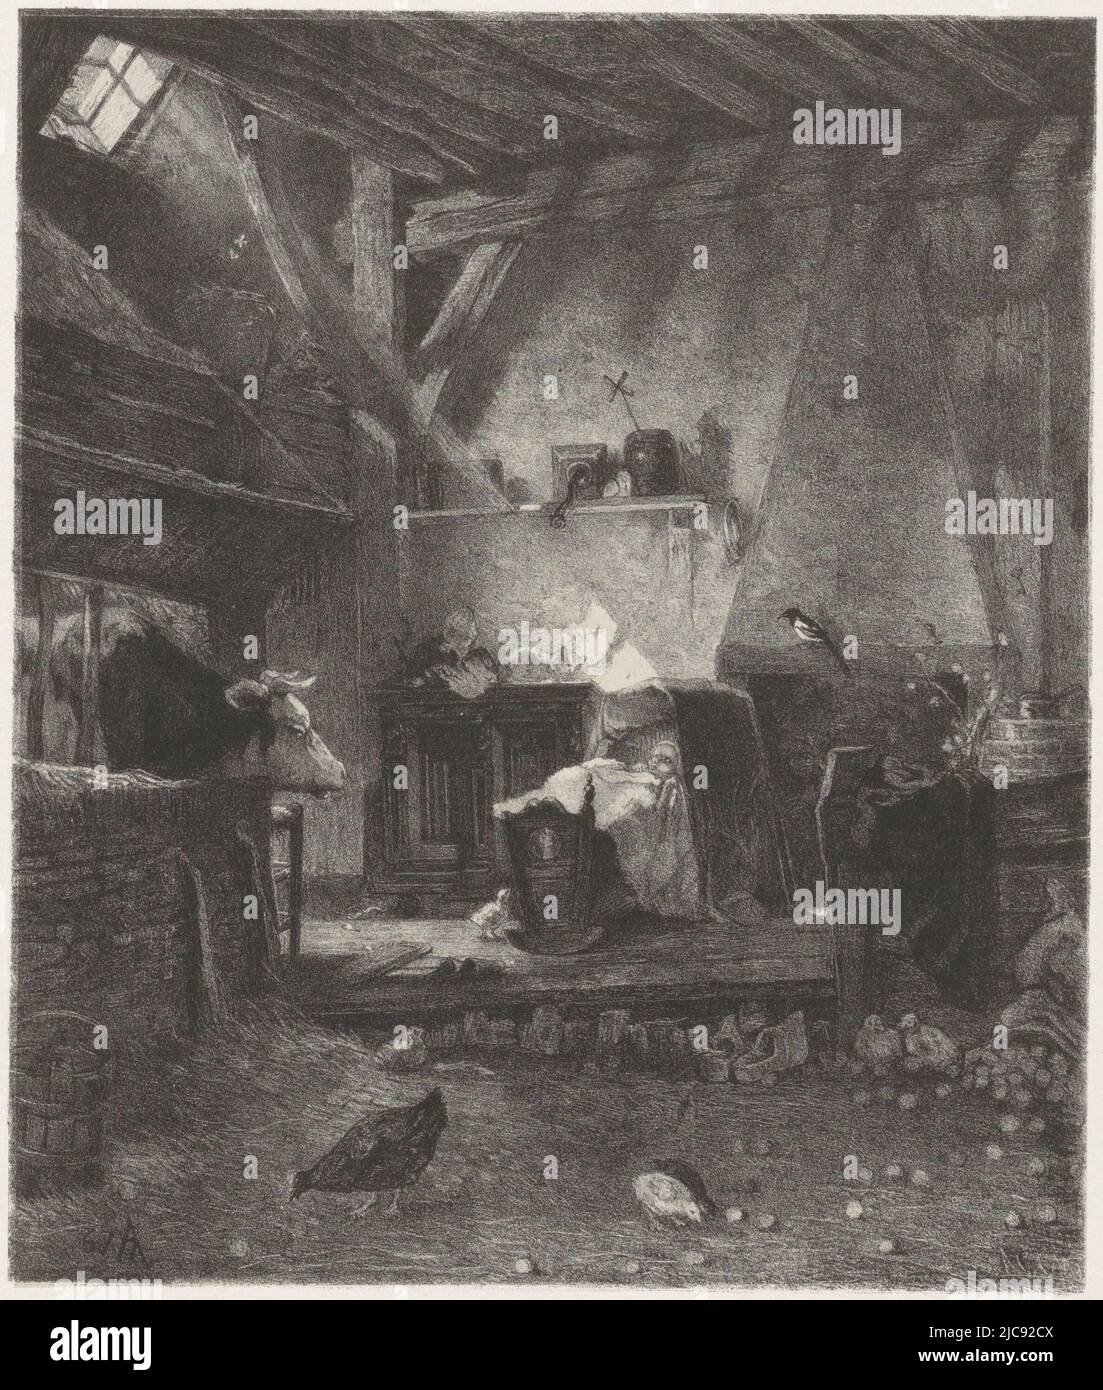 Interior of a farmhouse showing a cradle in which a child is lying. Sunlight shines through a skylight onto the crib. To the right a cow, in the foreground some chickens are scurrying about. The well-guarded child, print maker: Anthony Cornelis Cramer, (mentioned on object), August Allebé, (mentioned on object), printer: Koninklijke Nederlandsche Steendrukkerij, (mentioned on object), print maker: Amsterdam, printer: The Hague, 1867 - 1874, paper, h 352 mm × w 265 mm Stock Photo